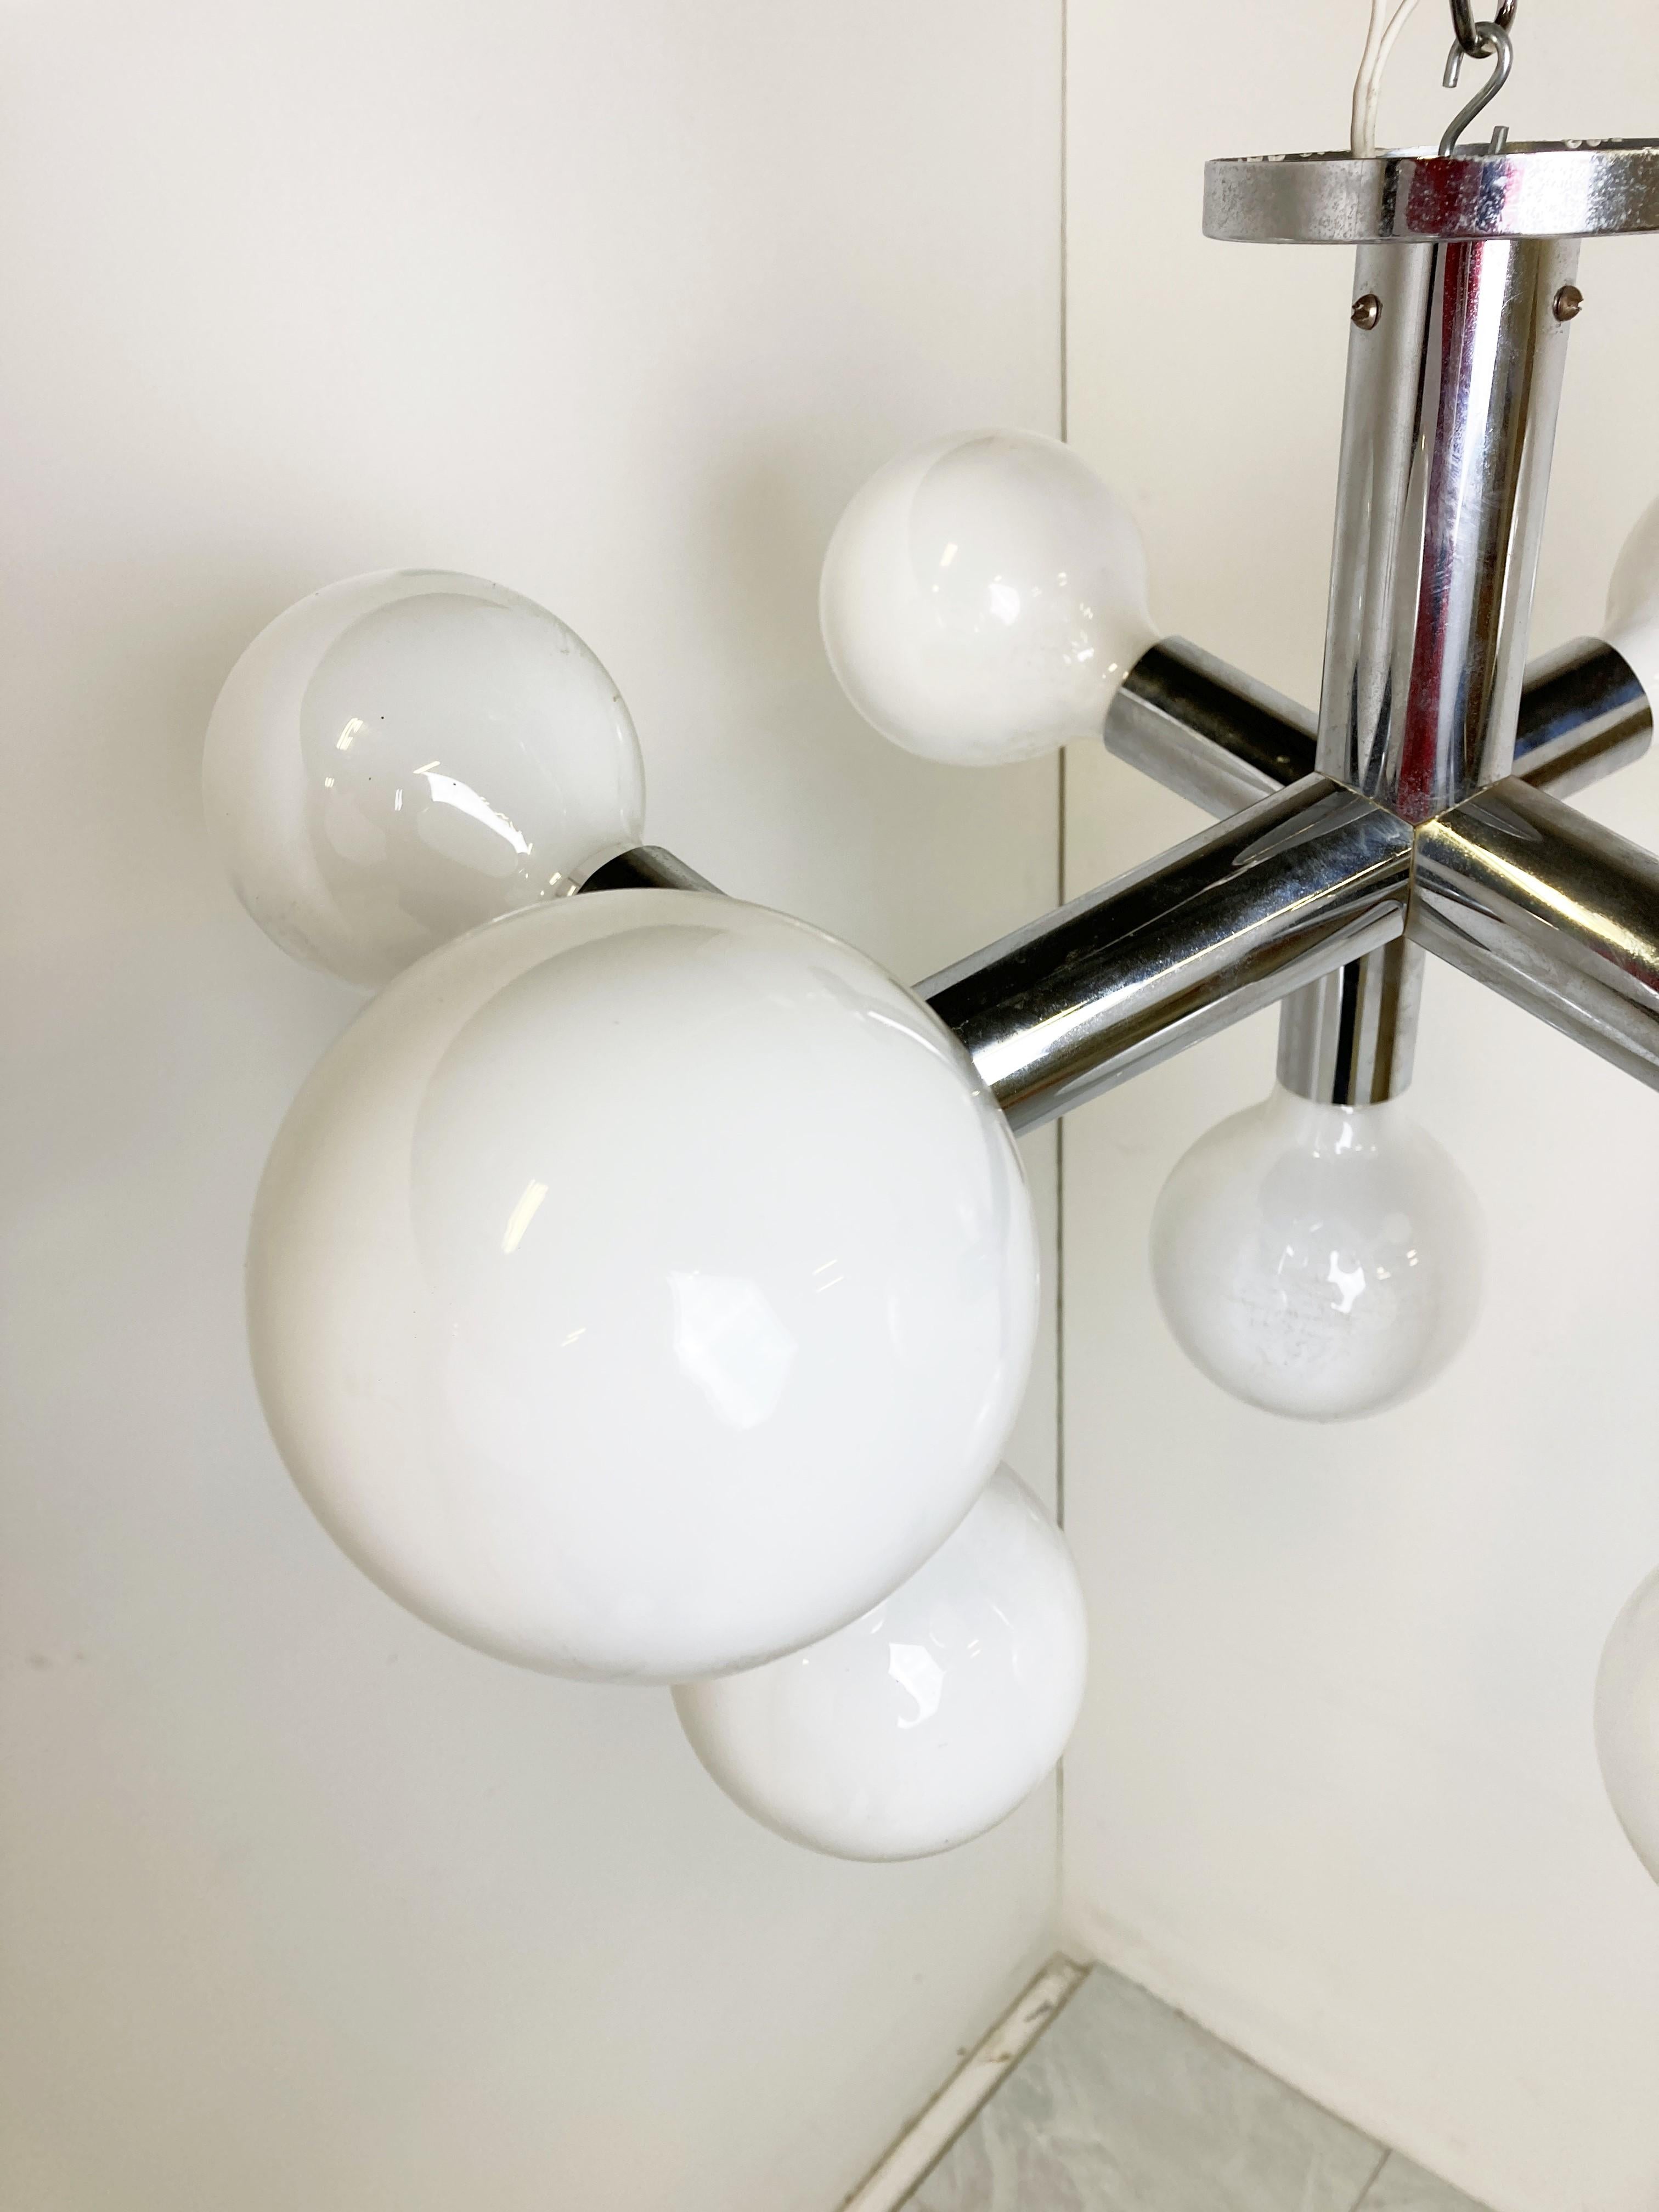 Space age sputnik / atomic chandelier designed by JT Kalmar.

Beautiful timeless design with tubular chrome arms and globe lightbulbs. 

We will supply the light bulbs unless based in a location that doesnt use 230v. (as they wont work on 110v